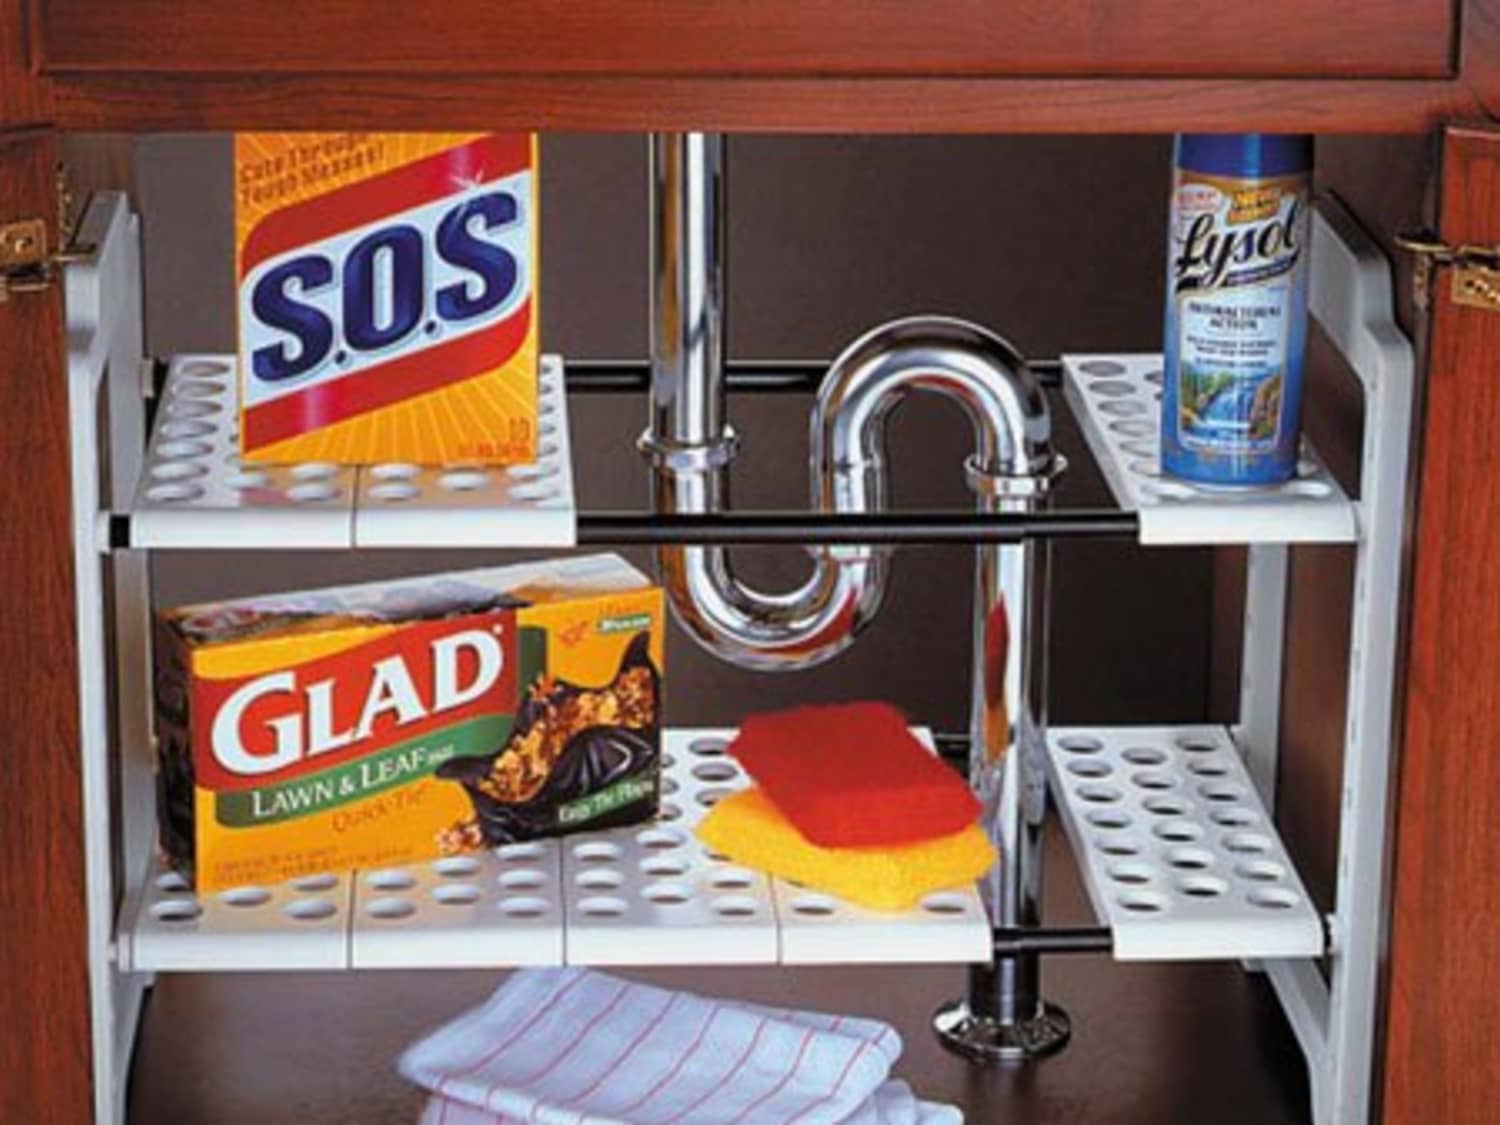 Look! Under-Sink Storage that Fits Around the Pipes